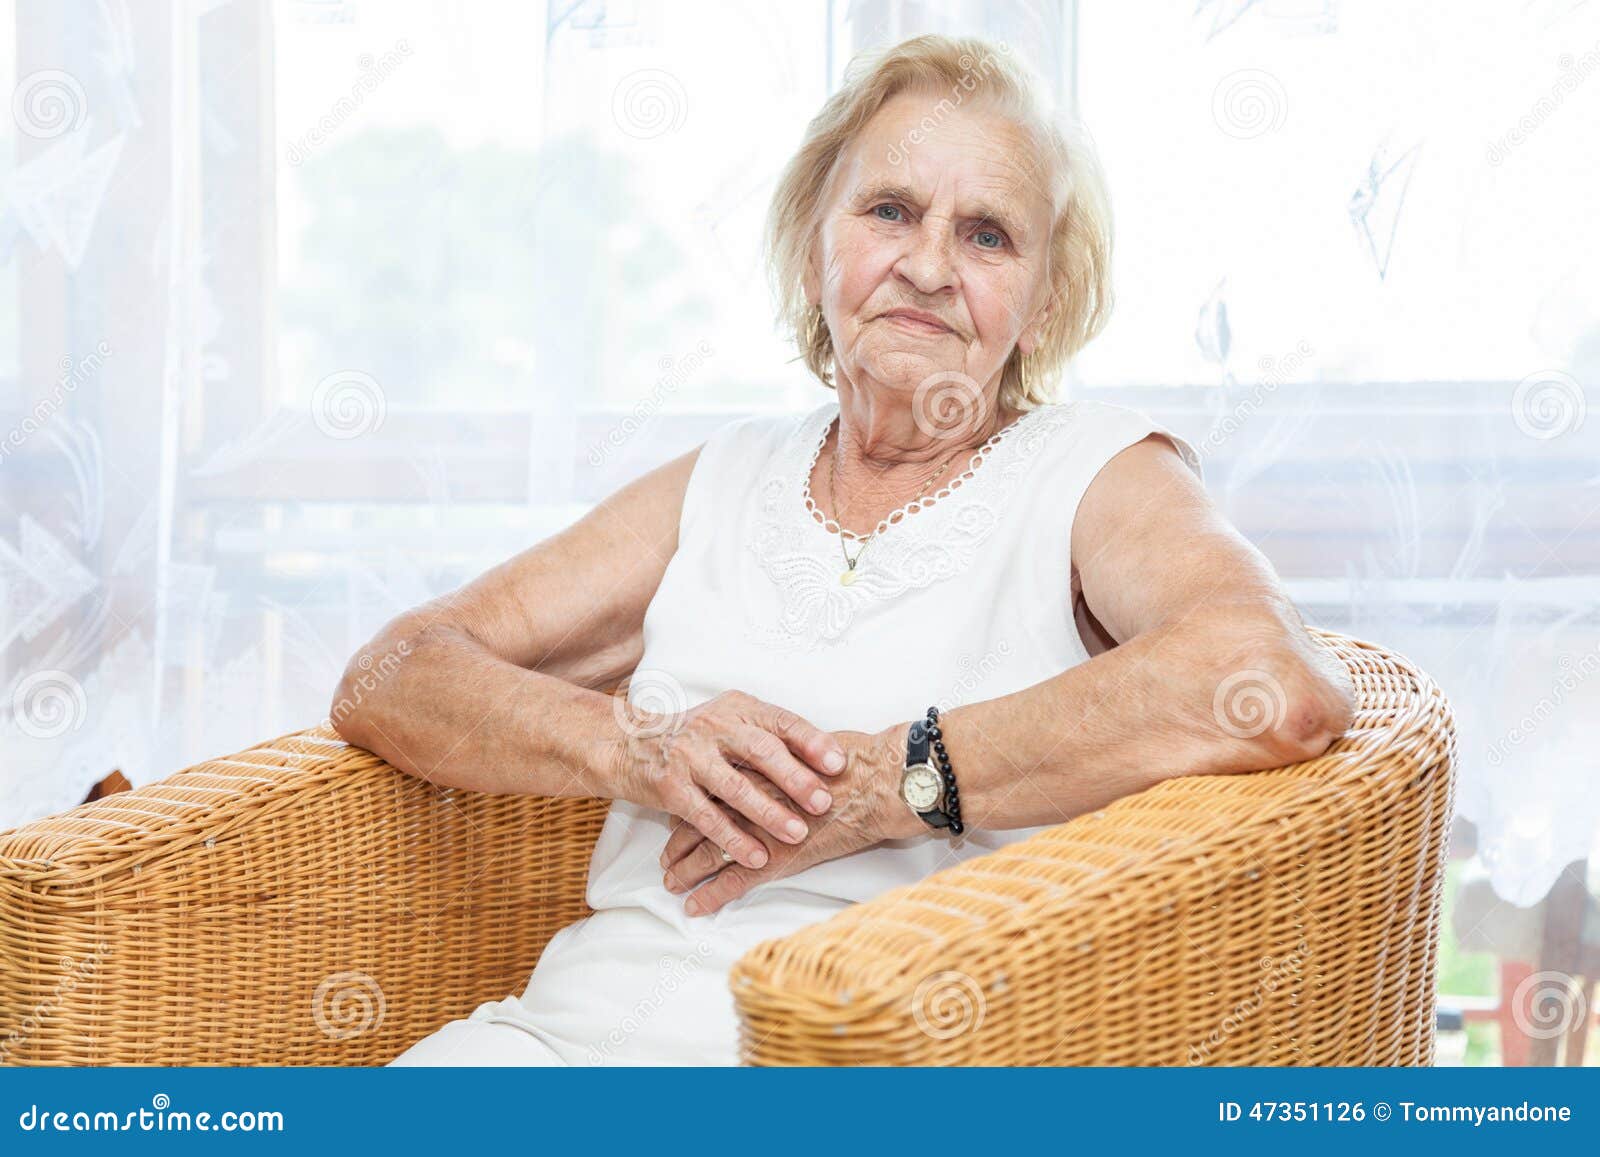 Portrait Of An Elderly Lady Sitting In A Chair Stock Photo Image